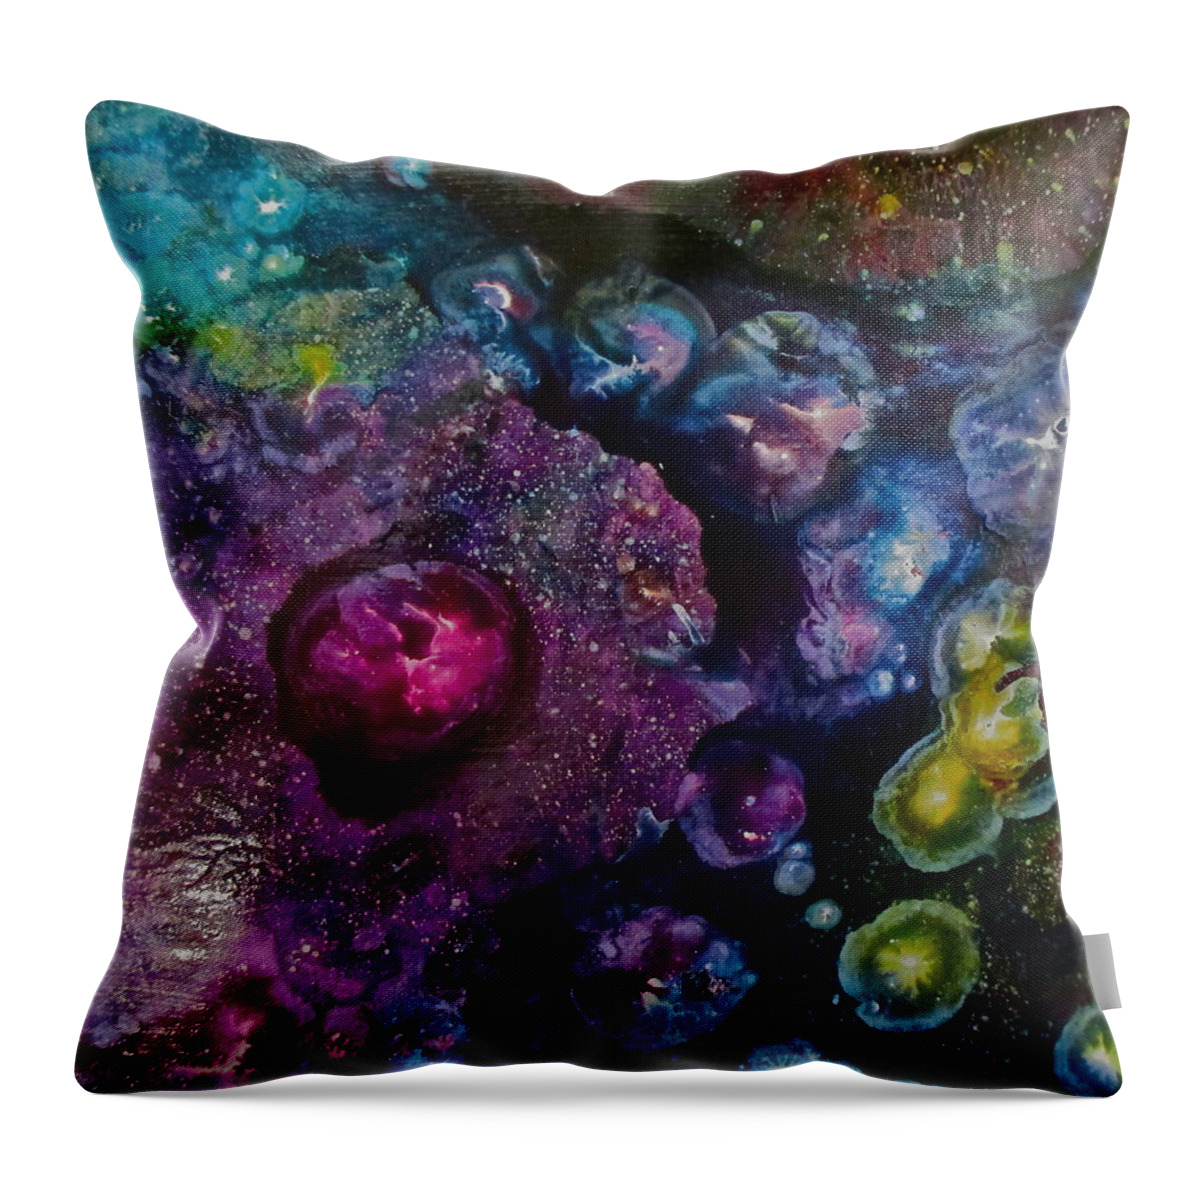 Watery Throw Pillow featuring the painting Watery Jewels by Janice Nabors Raiteri